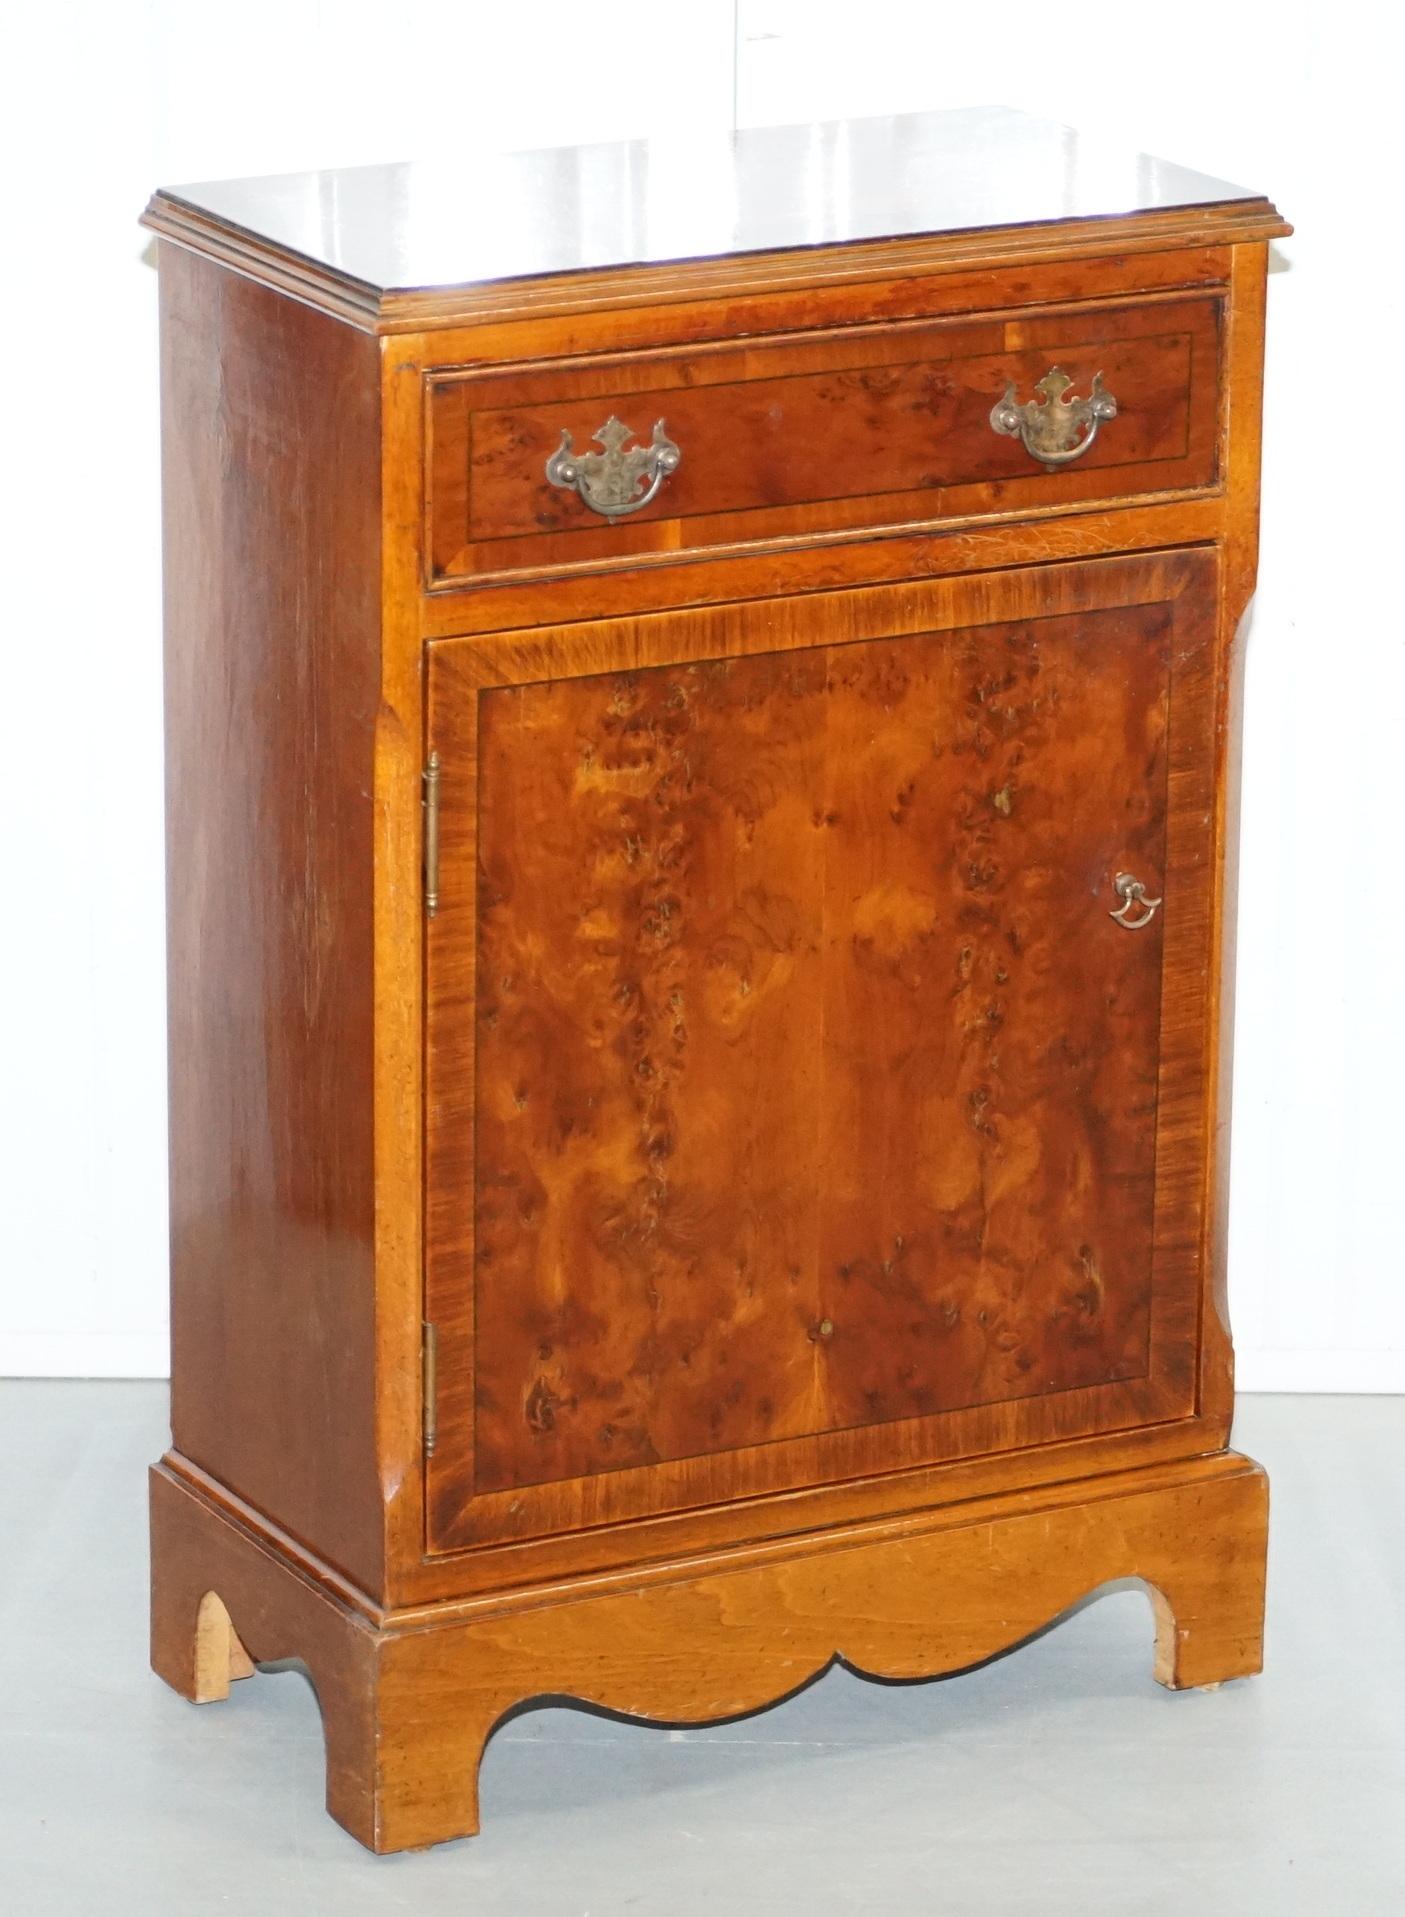 We are delighted to offer for sale this stunning pair of lovely vintage Burr Yew wood lamp end wine side table cupboards each with a single drawer and shelf.

A good looking and well-made pair, ideally suited in a living room next to seating to